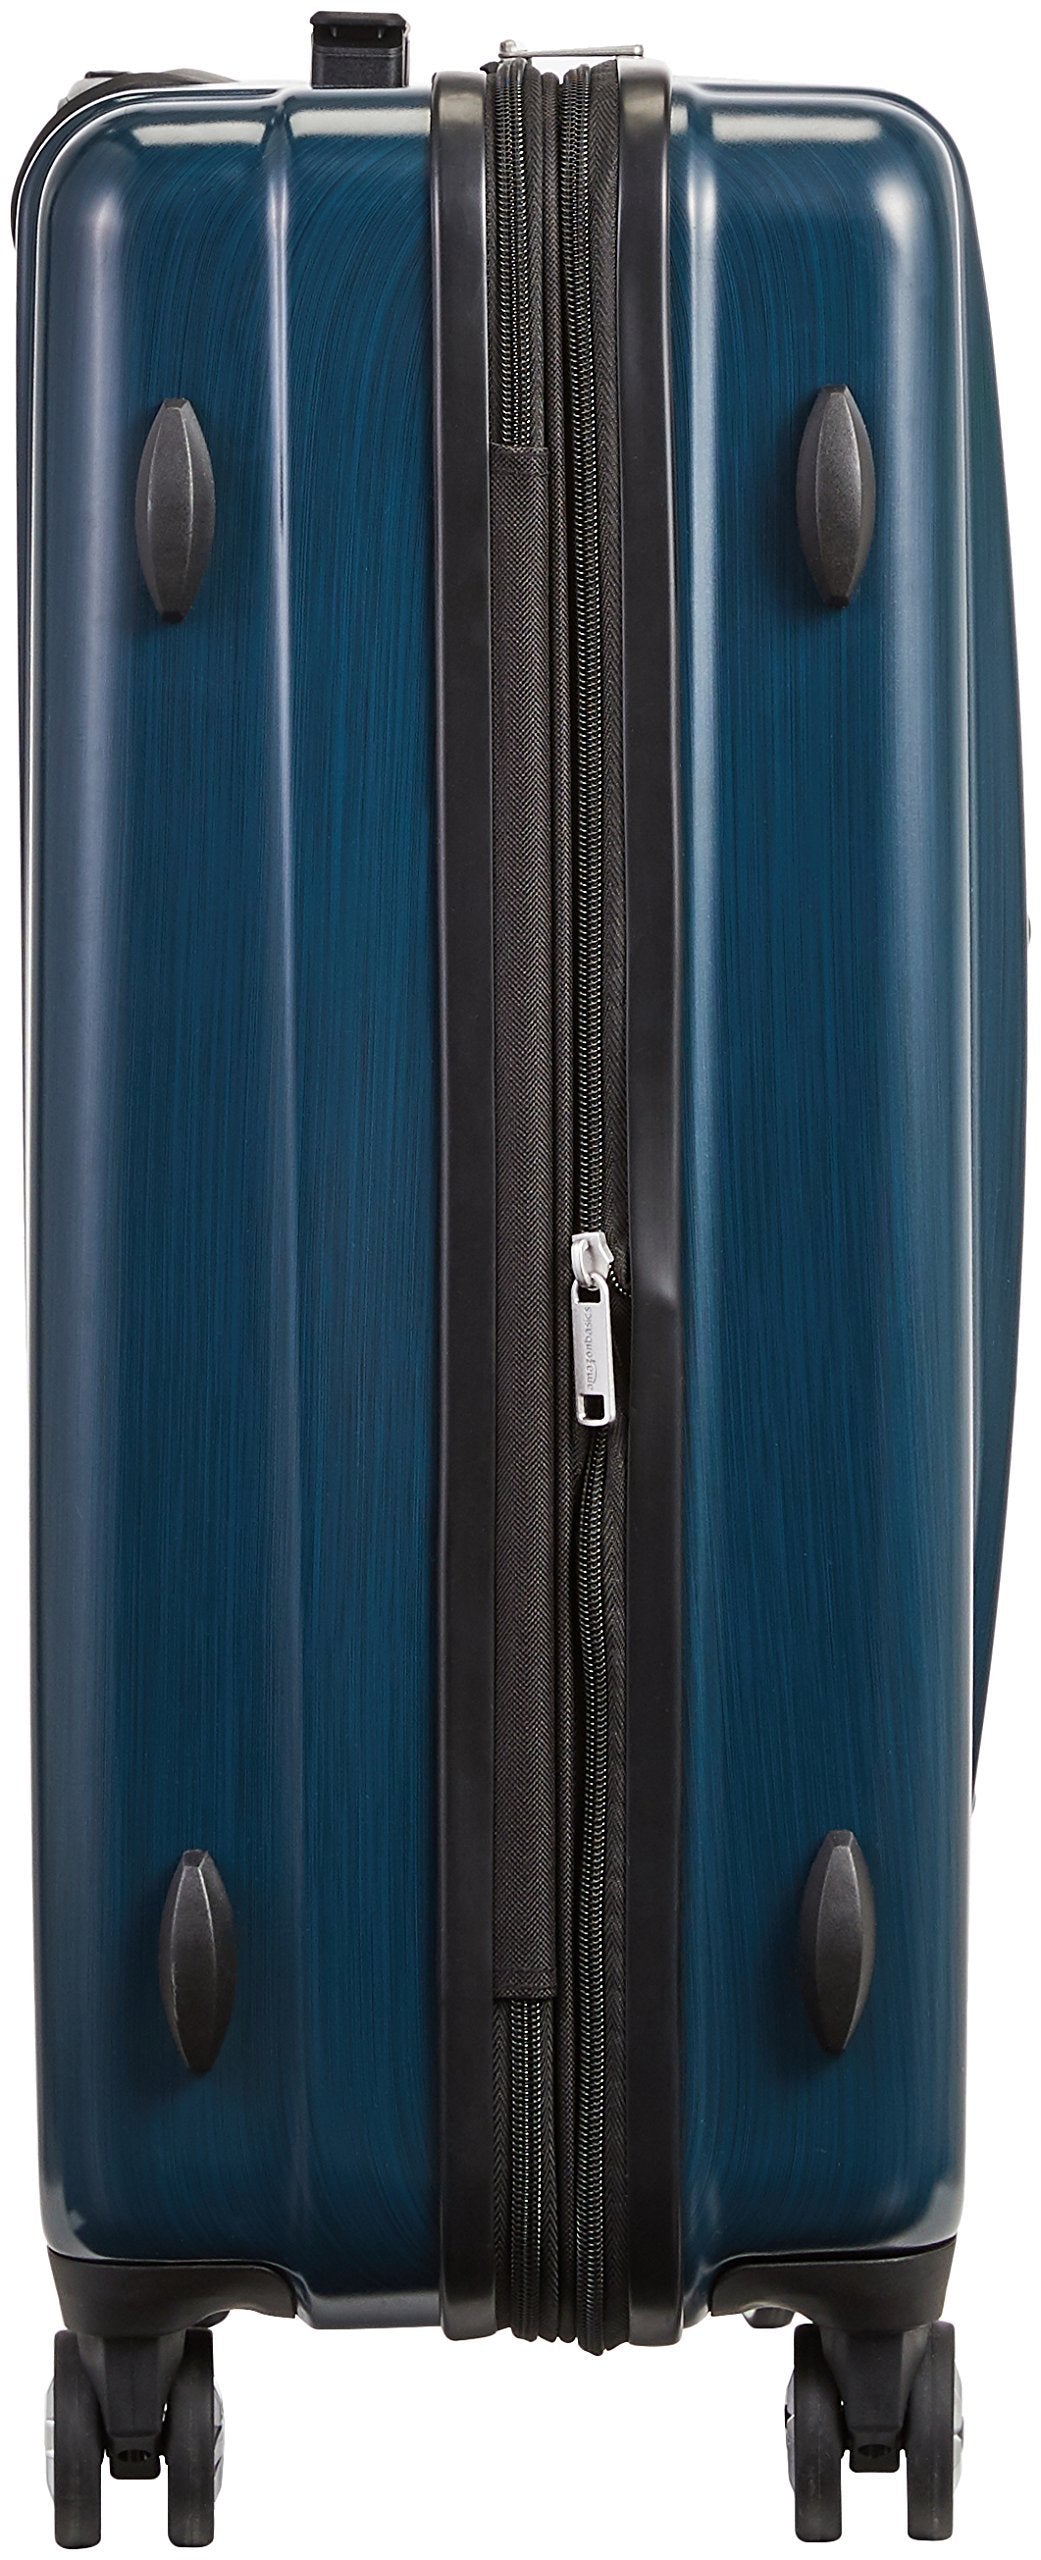 Metro Muscat Basics Hardshell Spinner Luggage - 24 inch (Material: ABS+ Polycarbonate), Navy Blue